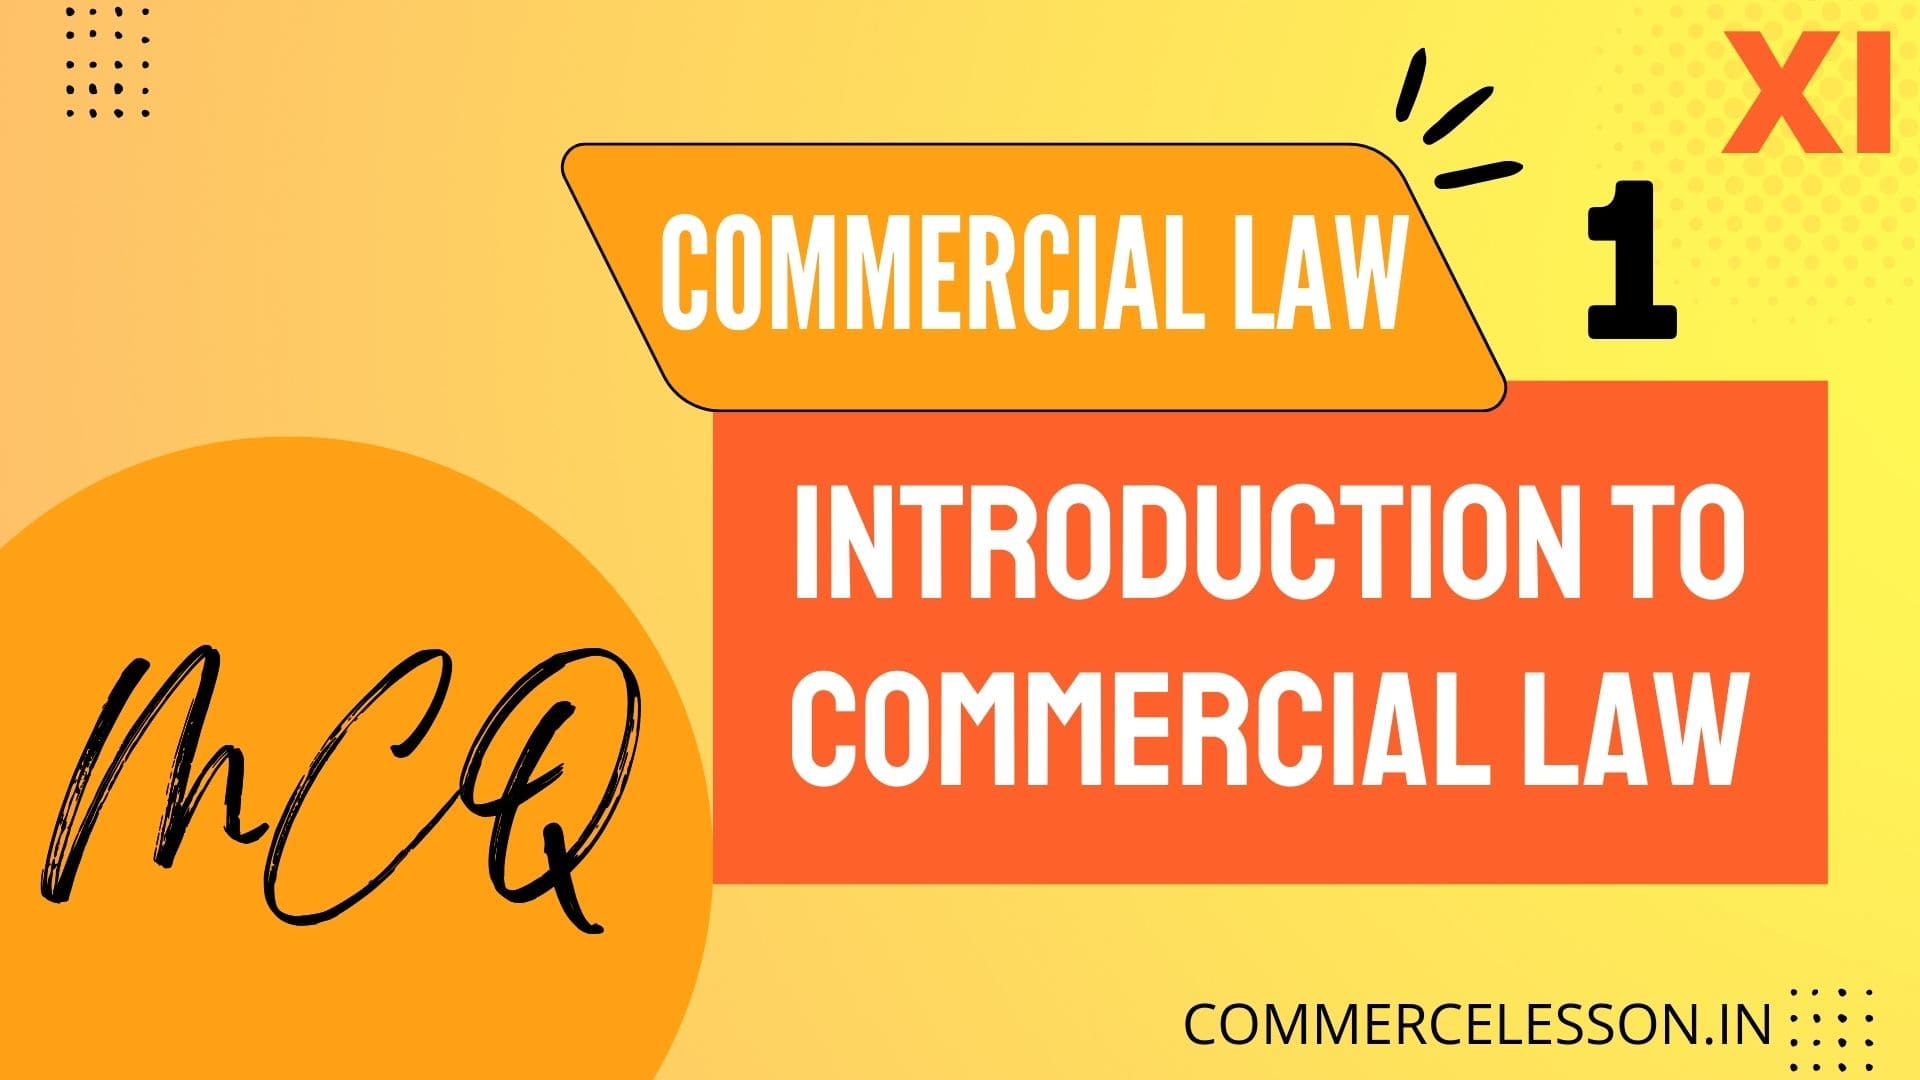 Introduction to Commercial Law MCQ